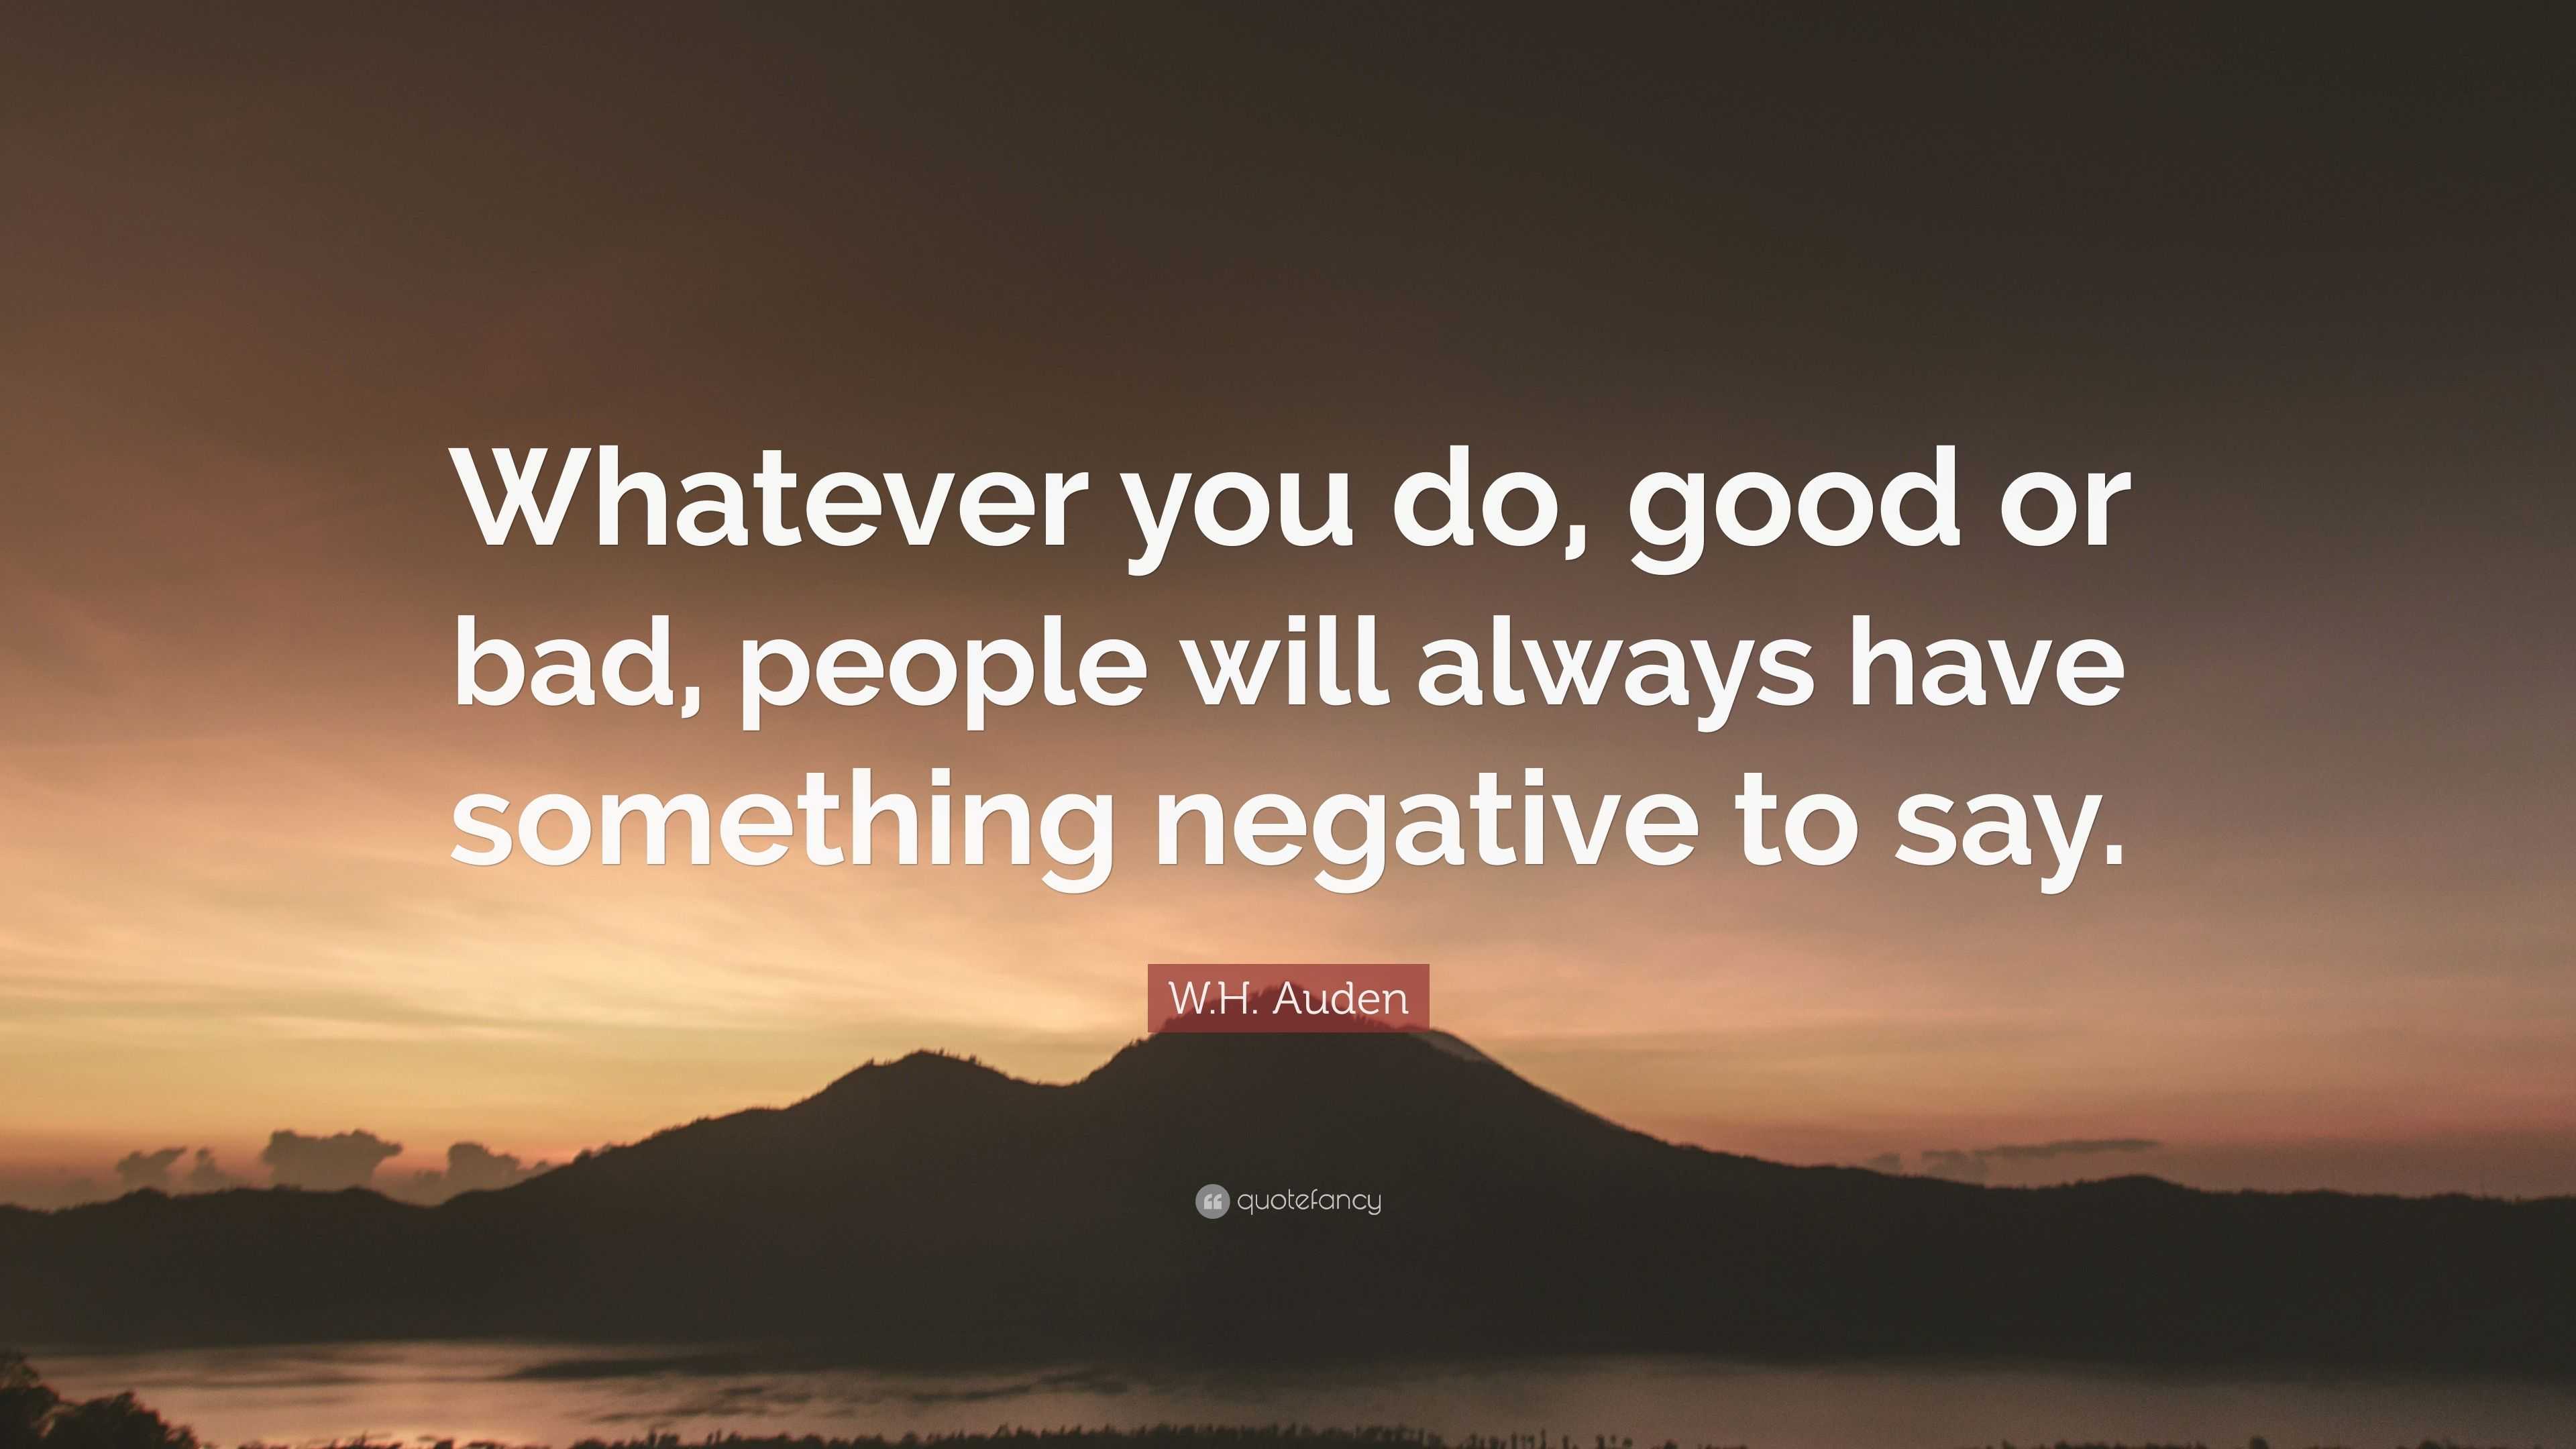 W.H. Auden Quote: “Whatever you do, good or bad, people will always